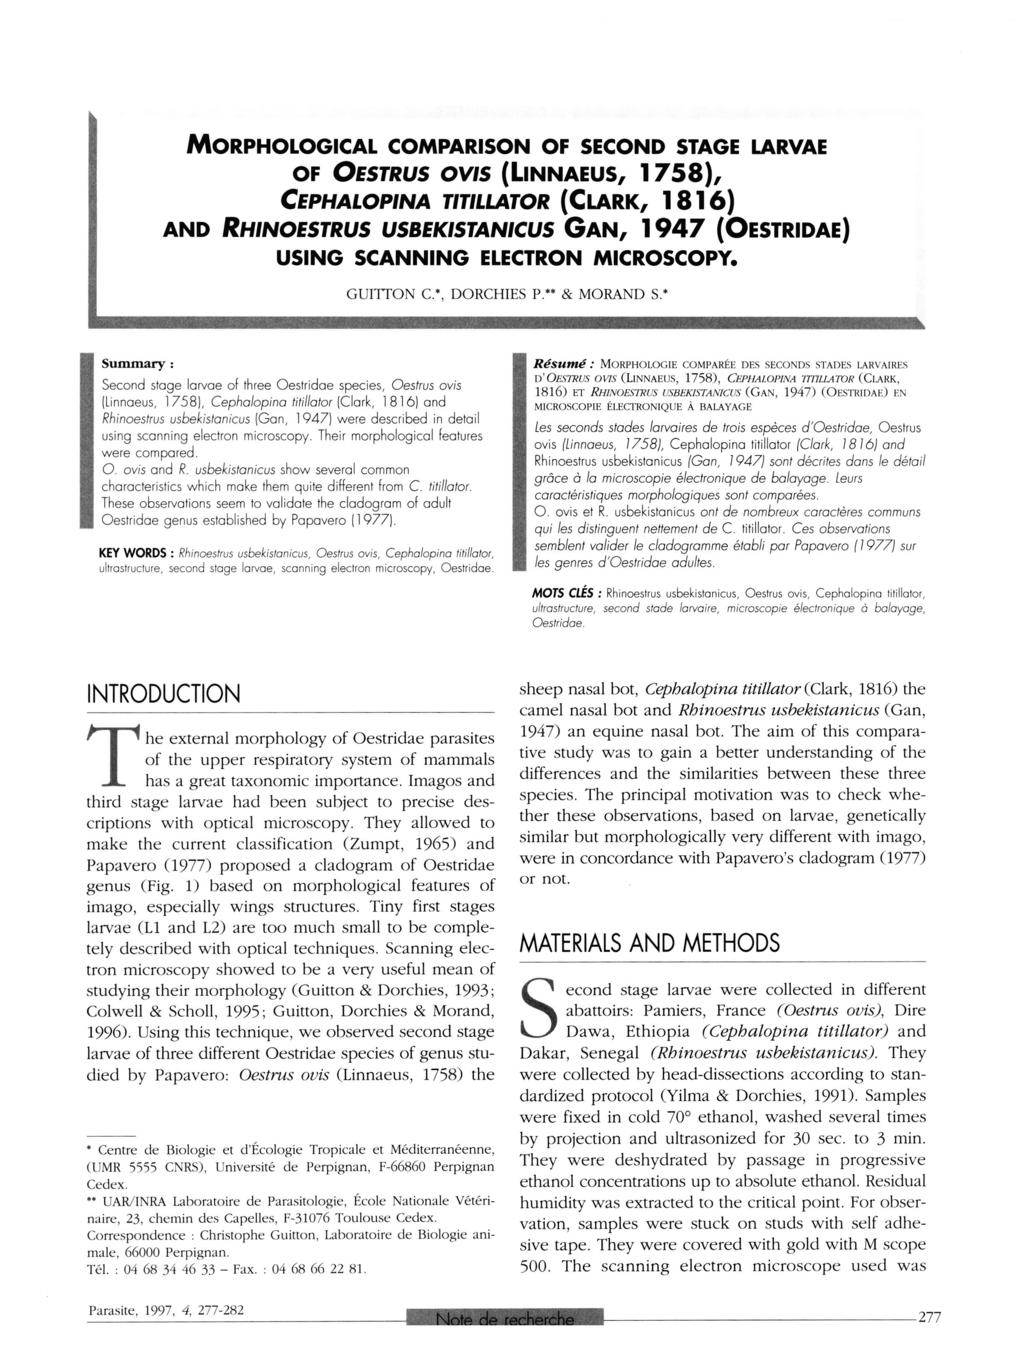 Article available at http://www.parasite-journal.org or http://dx.doi.org/10.